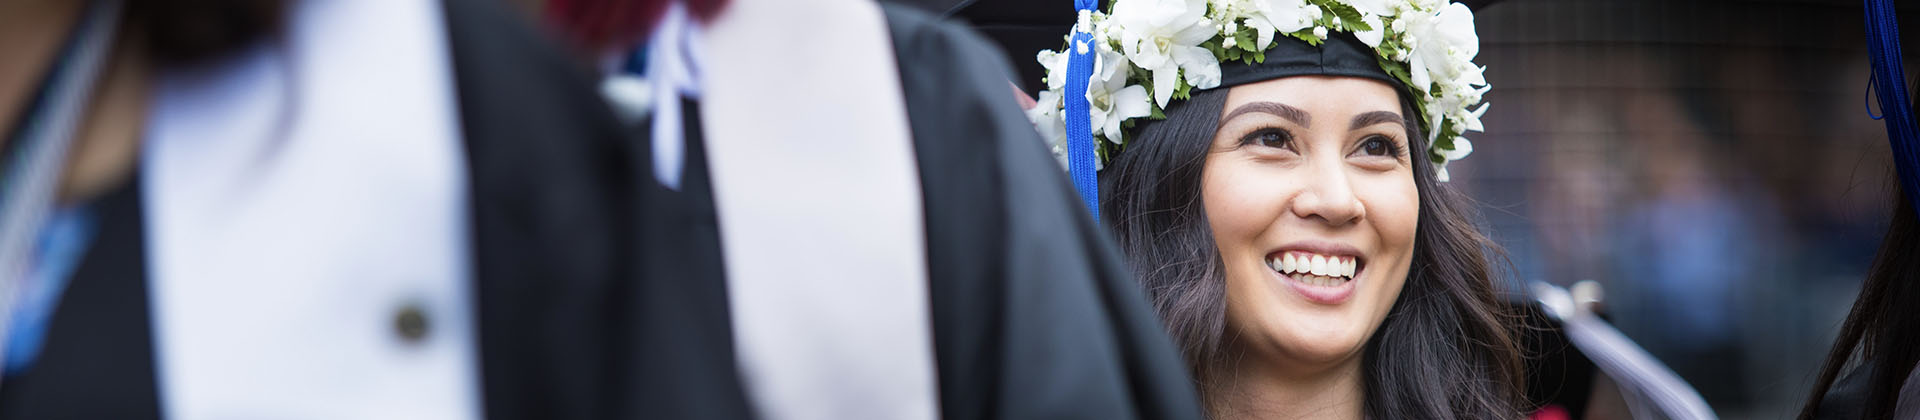  A woman with a graduation cap decorated with white flowers, stands in line to receive her diploma